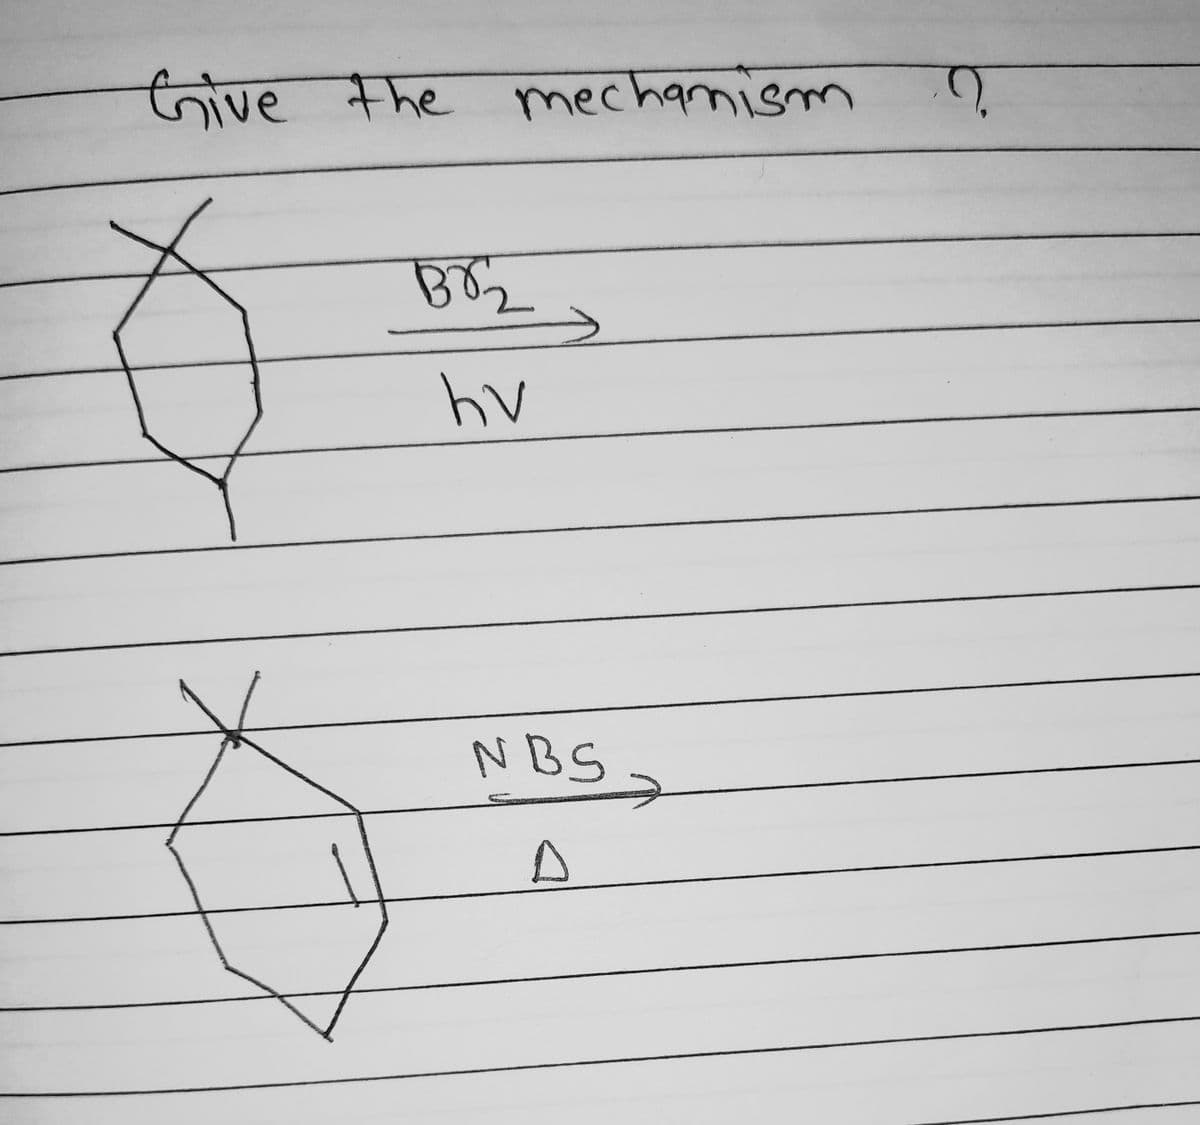 Give the mechanism
BB₂
hv
NBS
A
2